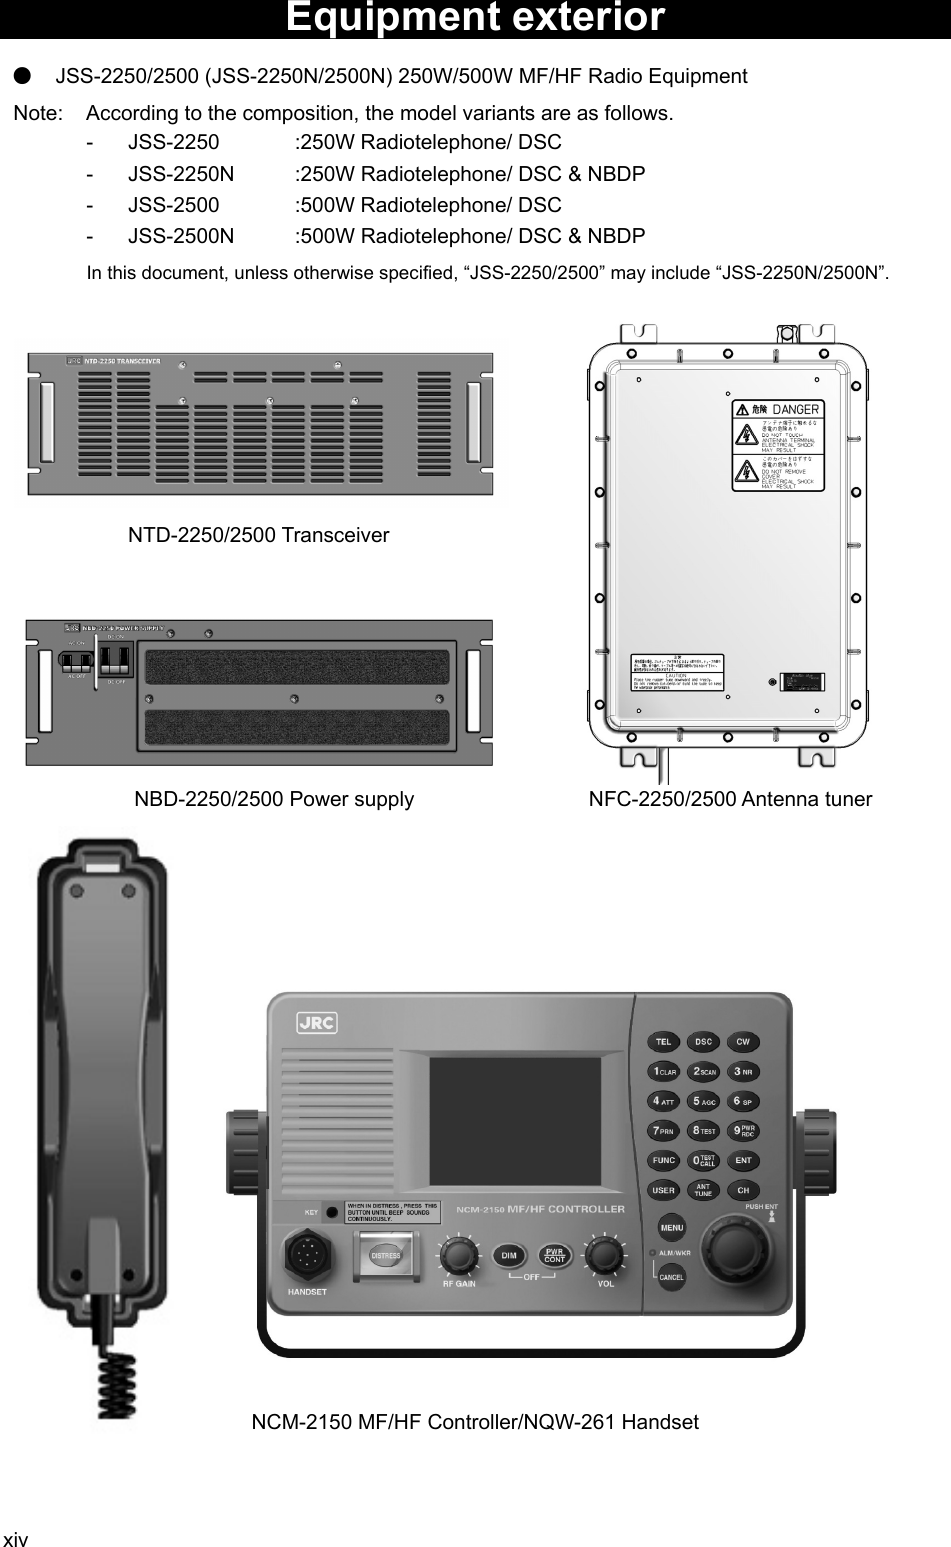 xiv Equipment exterior    ● JSS-2250/2500 (JSS-2250N/2500N) 250W/500W MF/HF Radio Equipment   Note:  According to the composition, the model variants are as follows. - JSS-2250  :250W Radiotelephone/ DSC -  JSS-2250N  :250W Radiotelephone/ DSC &amp; NBDP - JSS-2500  :500W Radiotelephone/ DSC -  JSS-2500N  :500W Radiotelephone/ DSC &amp; NBDP In this document, unless otherwise specified, “JSS-2250/2500” may include “JSS-2250N/2500N”.           NTD-2250/2500 Transceiver             NBD-2250/2500 Power supply    NFC-2250/2500 Antenna tuner                            NCM-2150 MF/HF Controller/NQW-261 Handset    